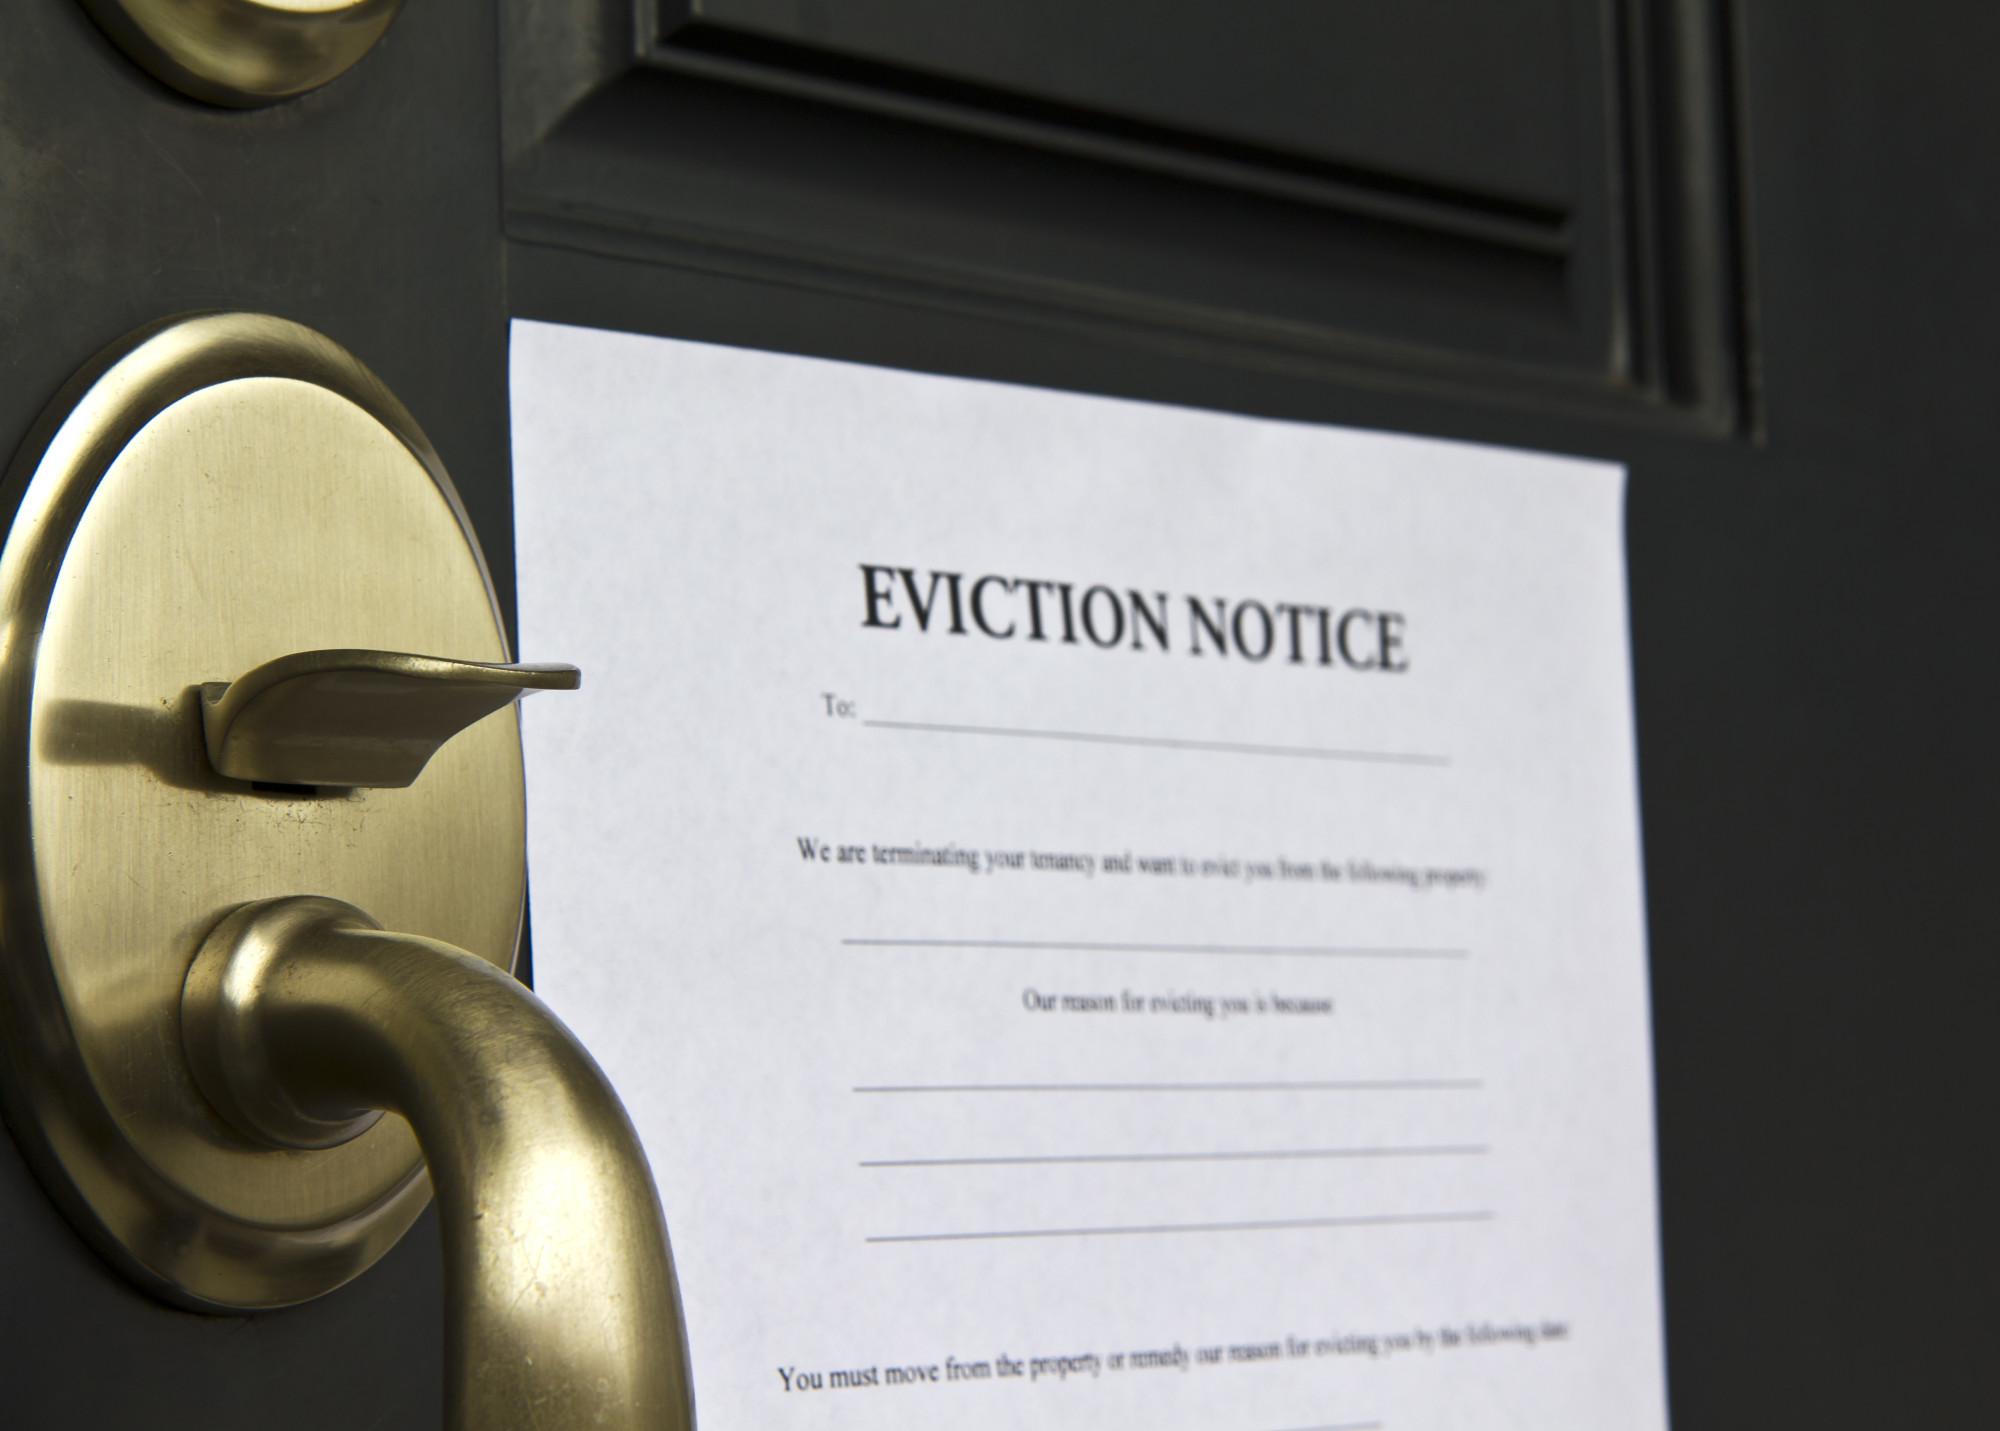 A Quick Landlord's Guide to the Eviction Process